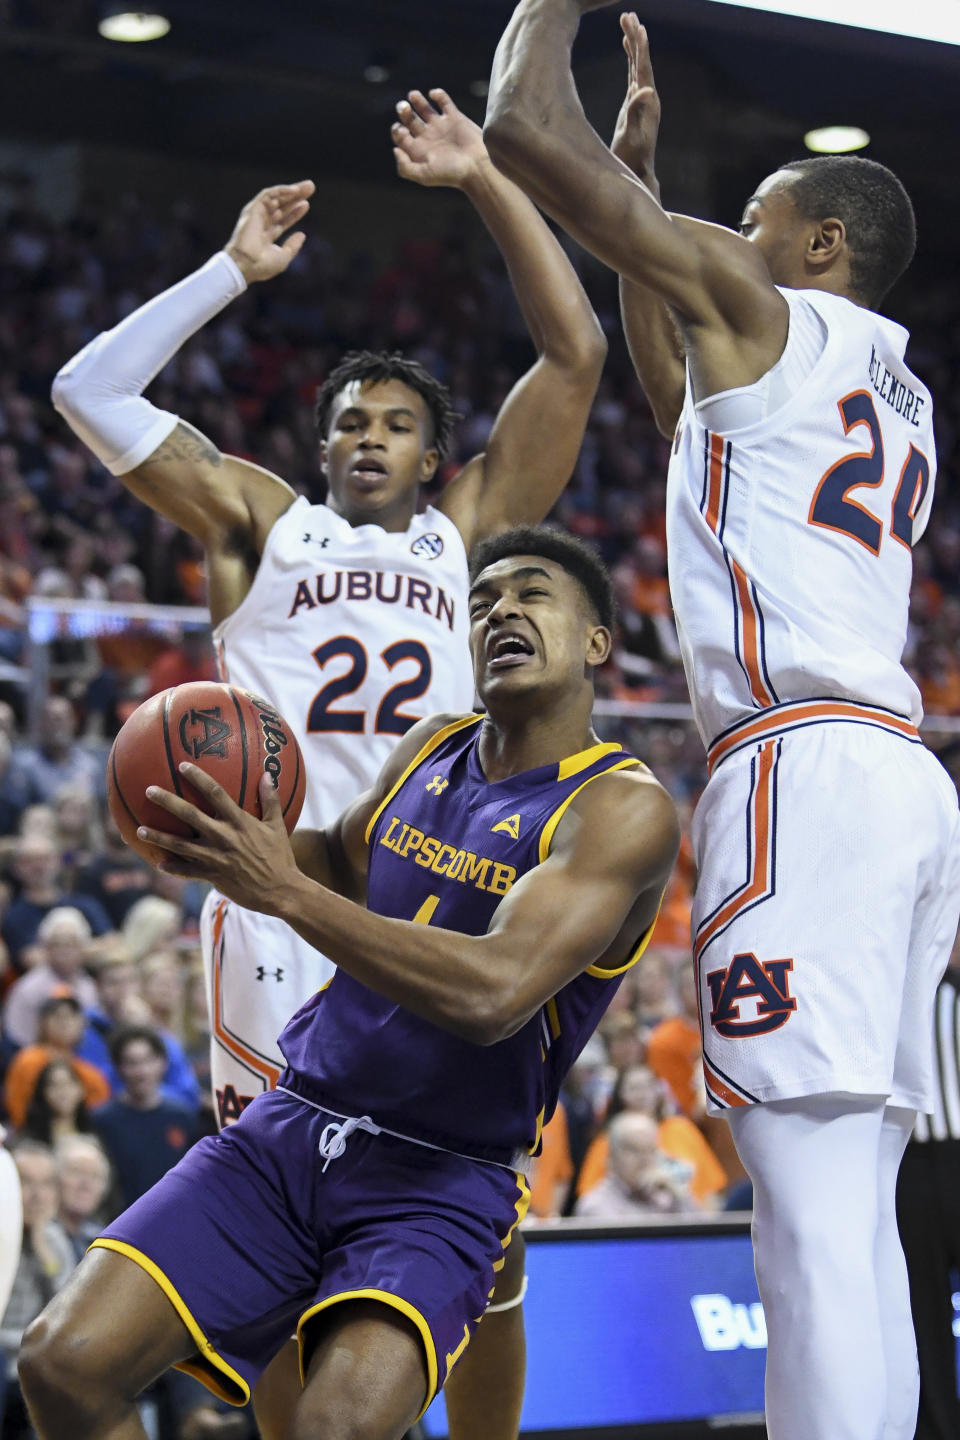 Lipscomb guard Greg Jones (1) looks to shoot while defended by Auburn forward Anfernee McLemore (24) and guard Allen Flanigan (22) during the first half of an NCAA college basketball game Sunday, Dec. 29, 2019, in Auburn, Ala. (AP Photo/Julie Bennett)